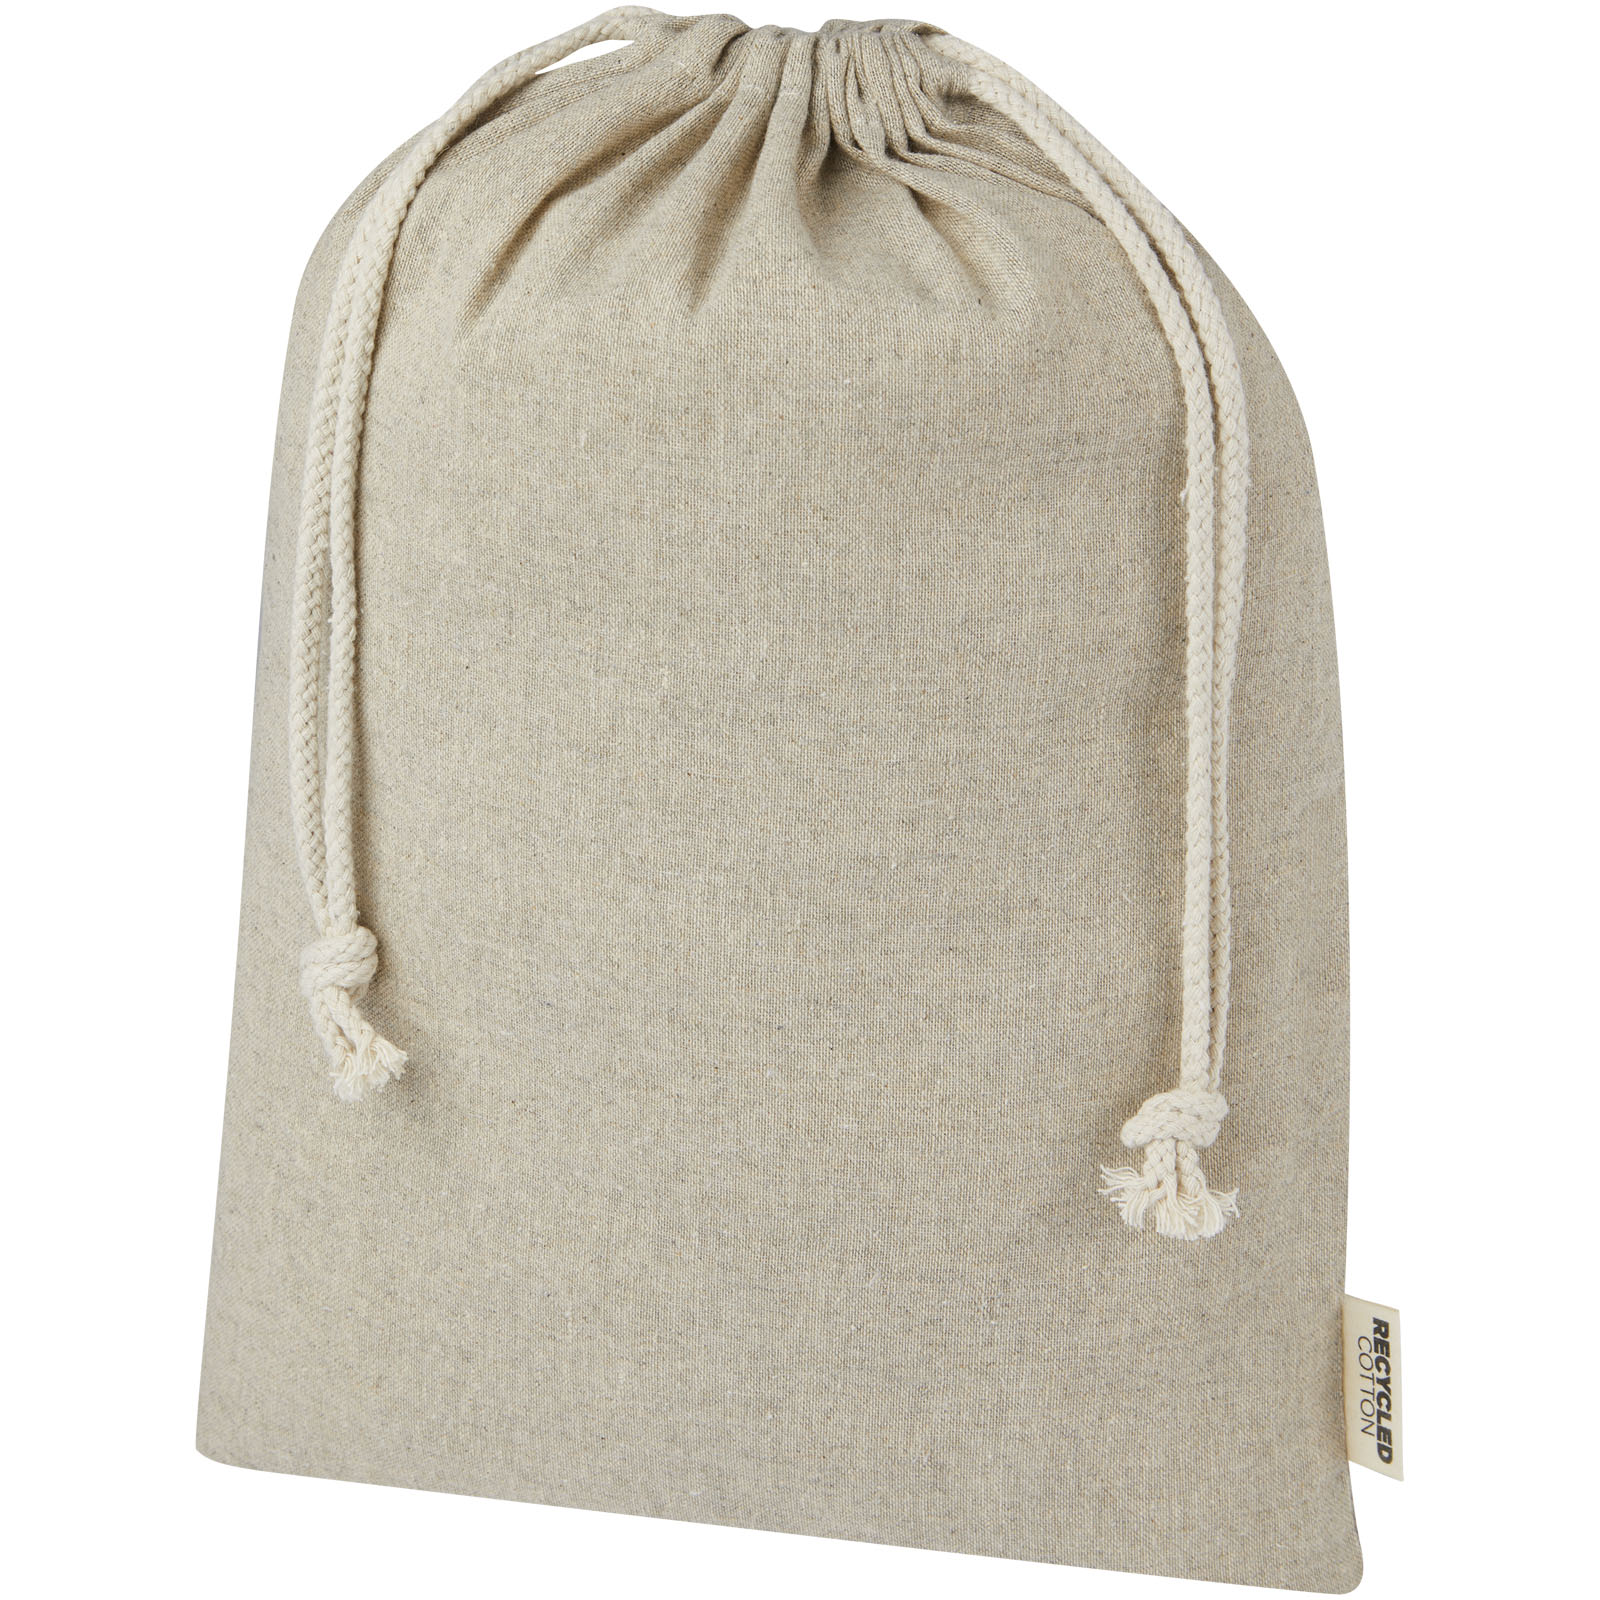 Bags - Pheebs 150 g/m² GRS recycled cotton gift bag large 4L